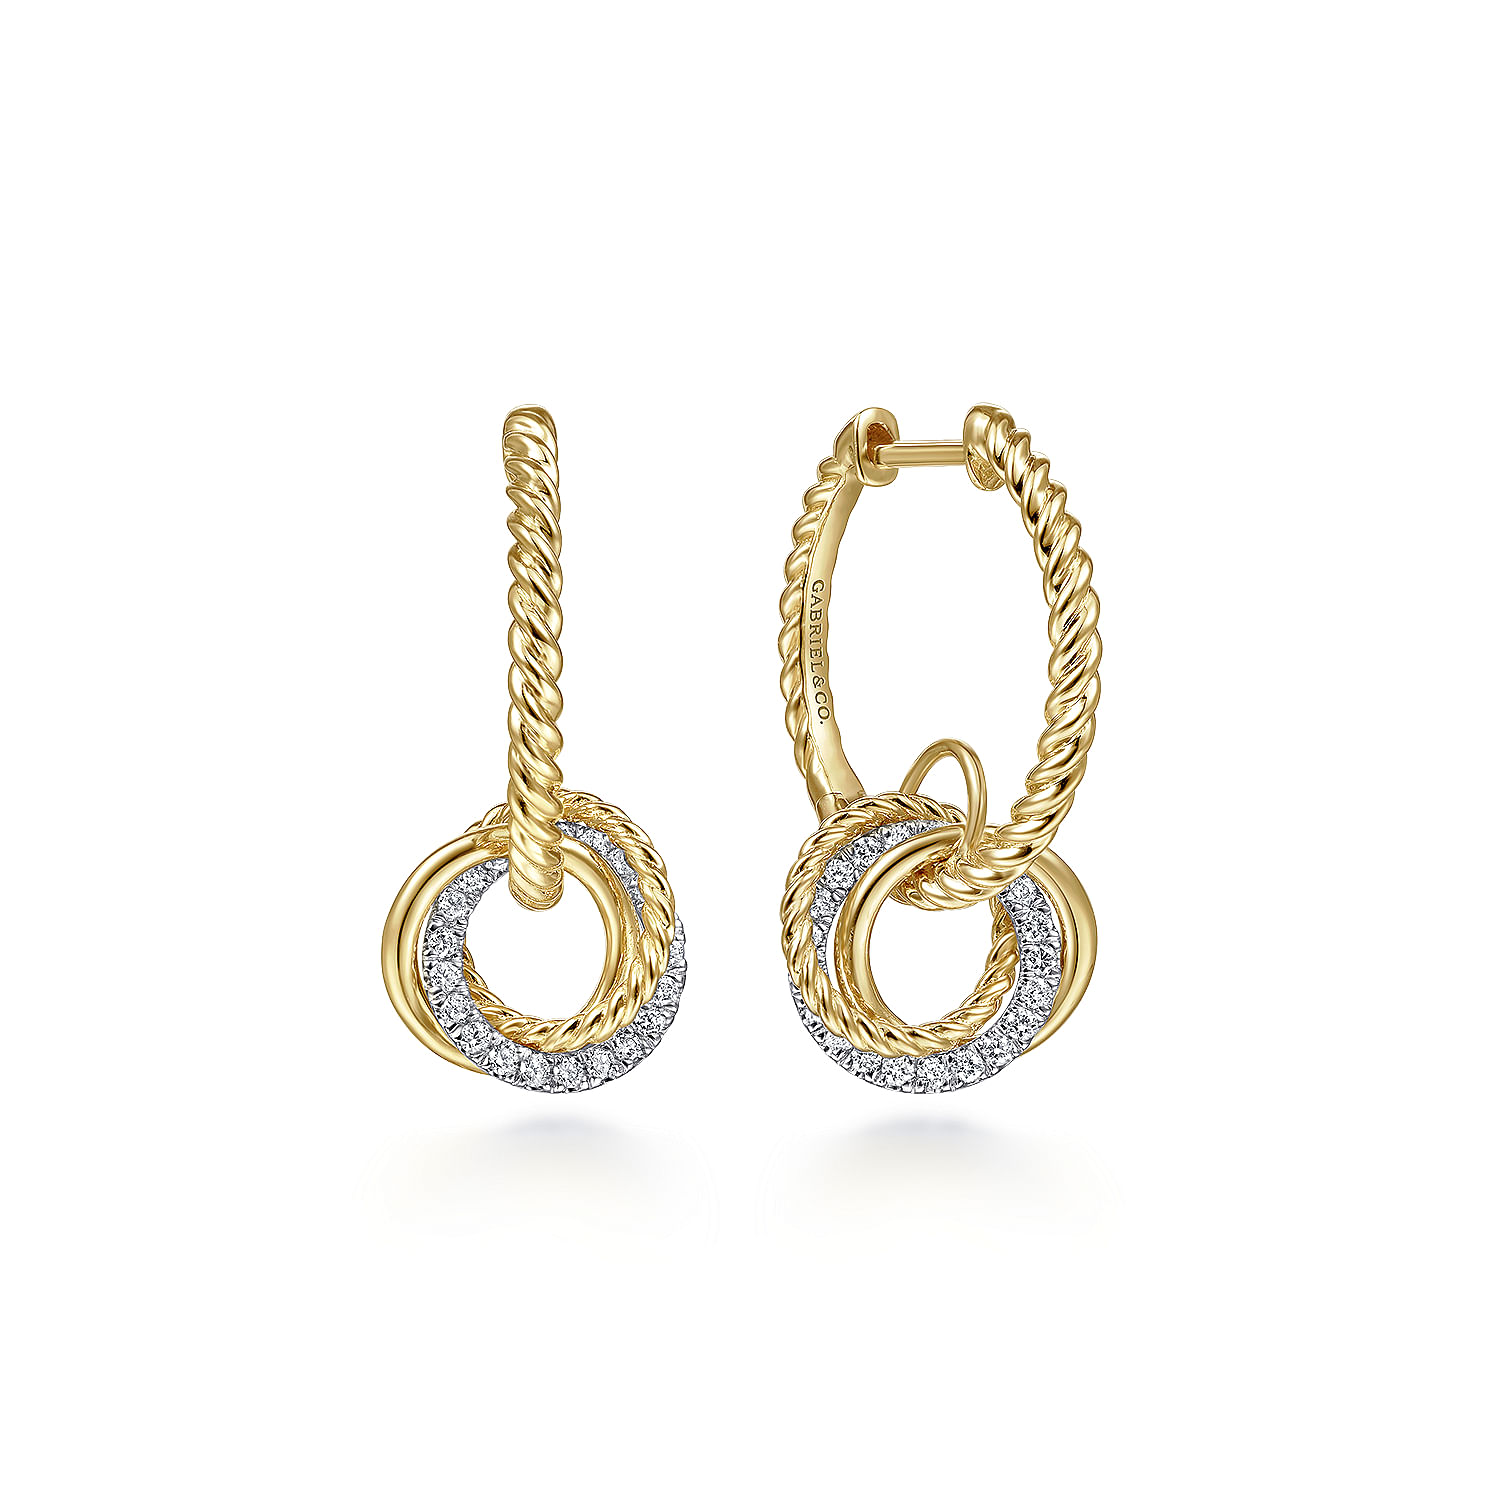 14K Yellow-White Gold Rope Huggie Earrings with Diamond and Plain Gold Knot Design.